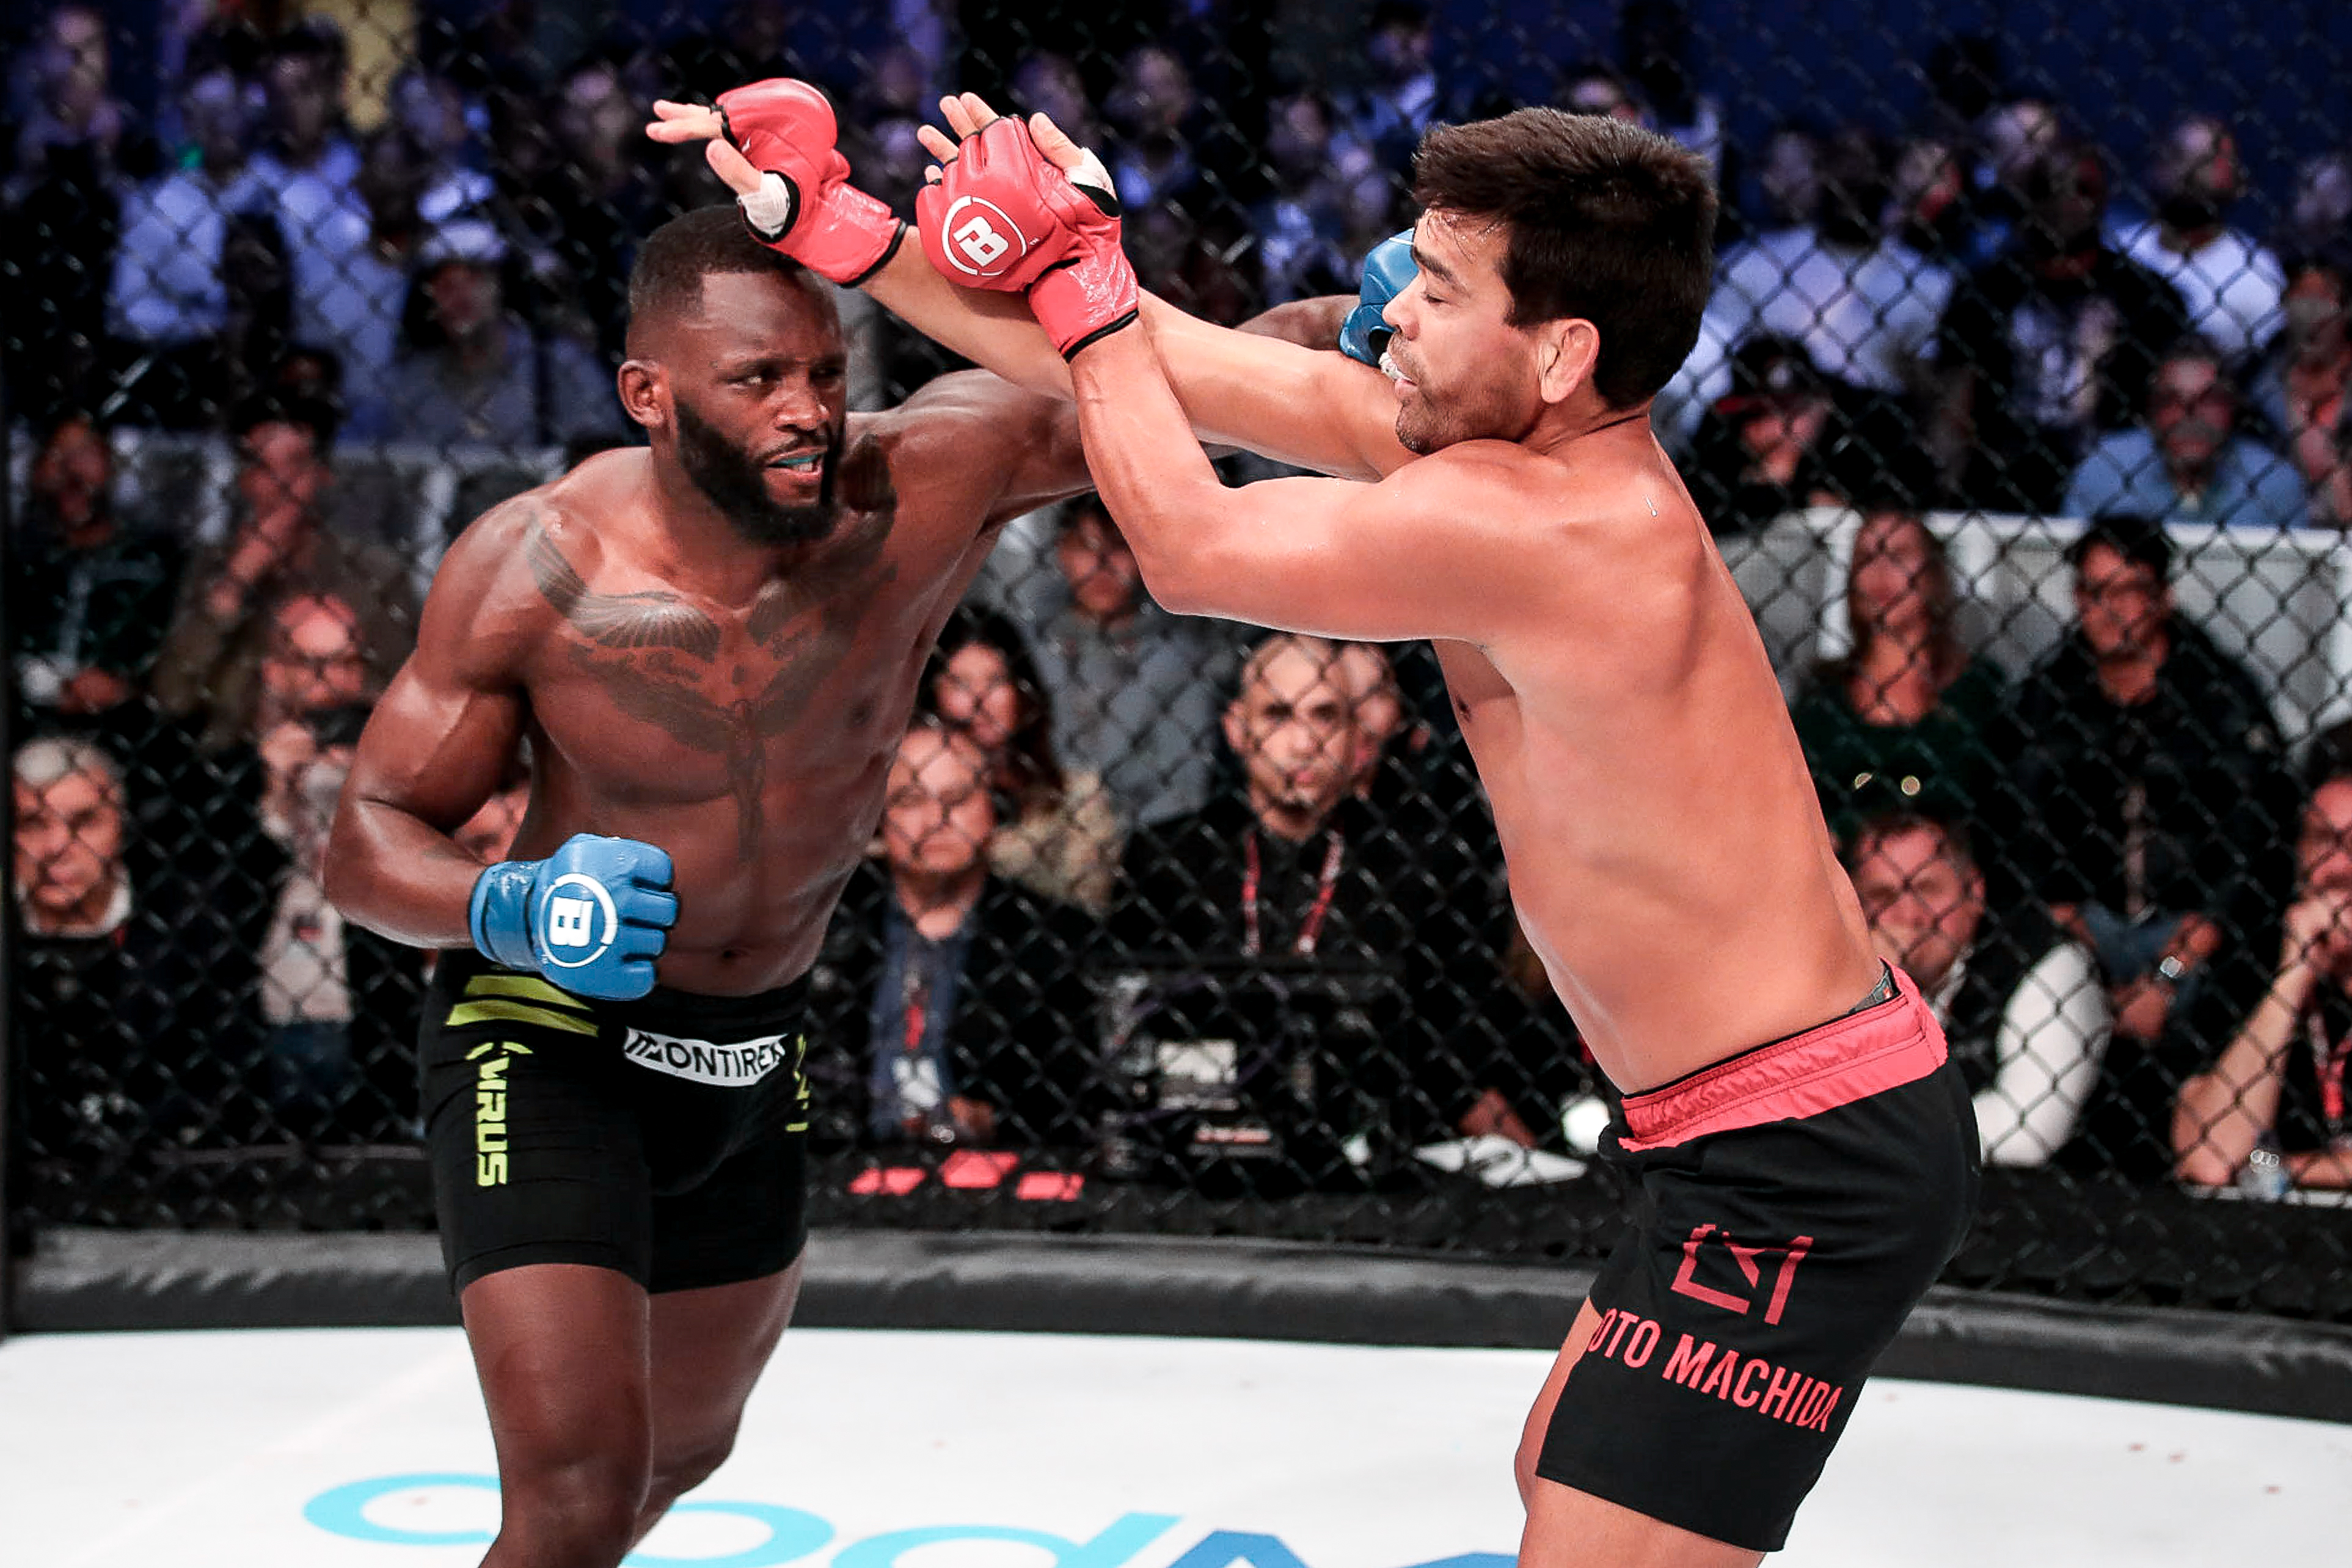 ‘I will jump straight in there!’ – Fabian Edwards ready to step in and fight Gegard Mousasi this summer after stunning Lyoto Machida win